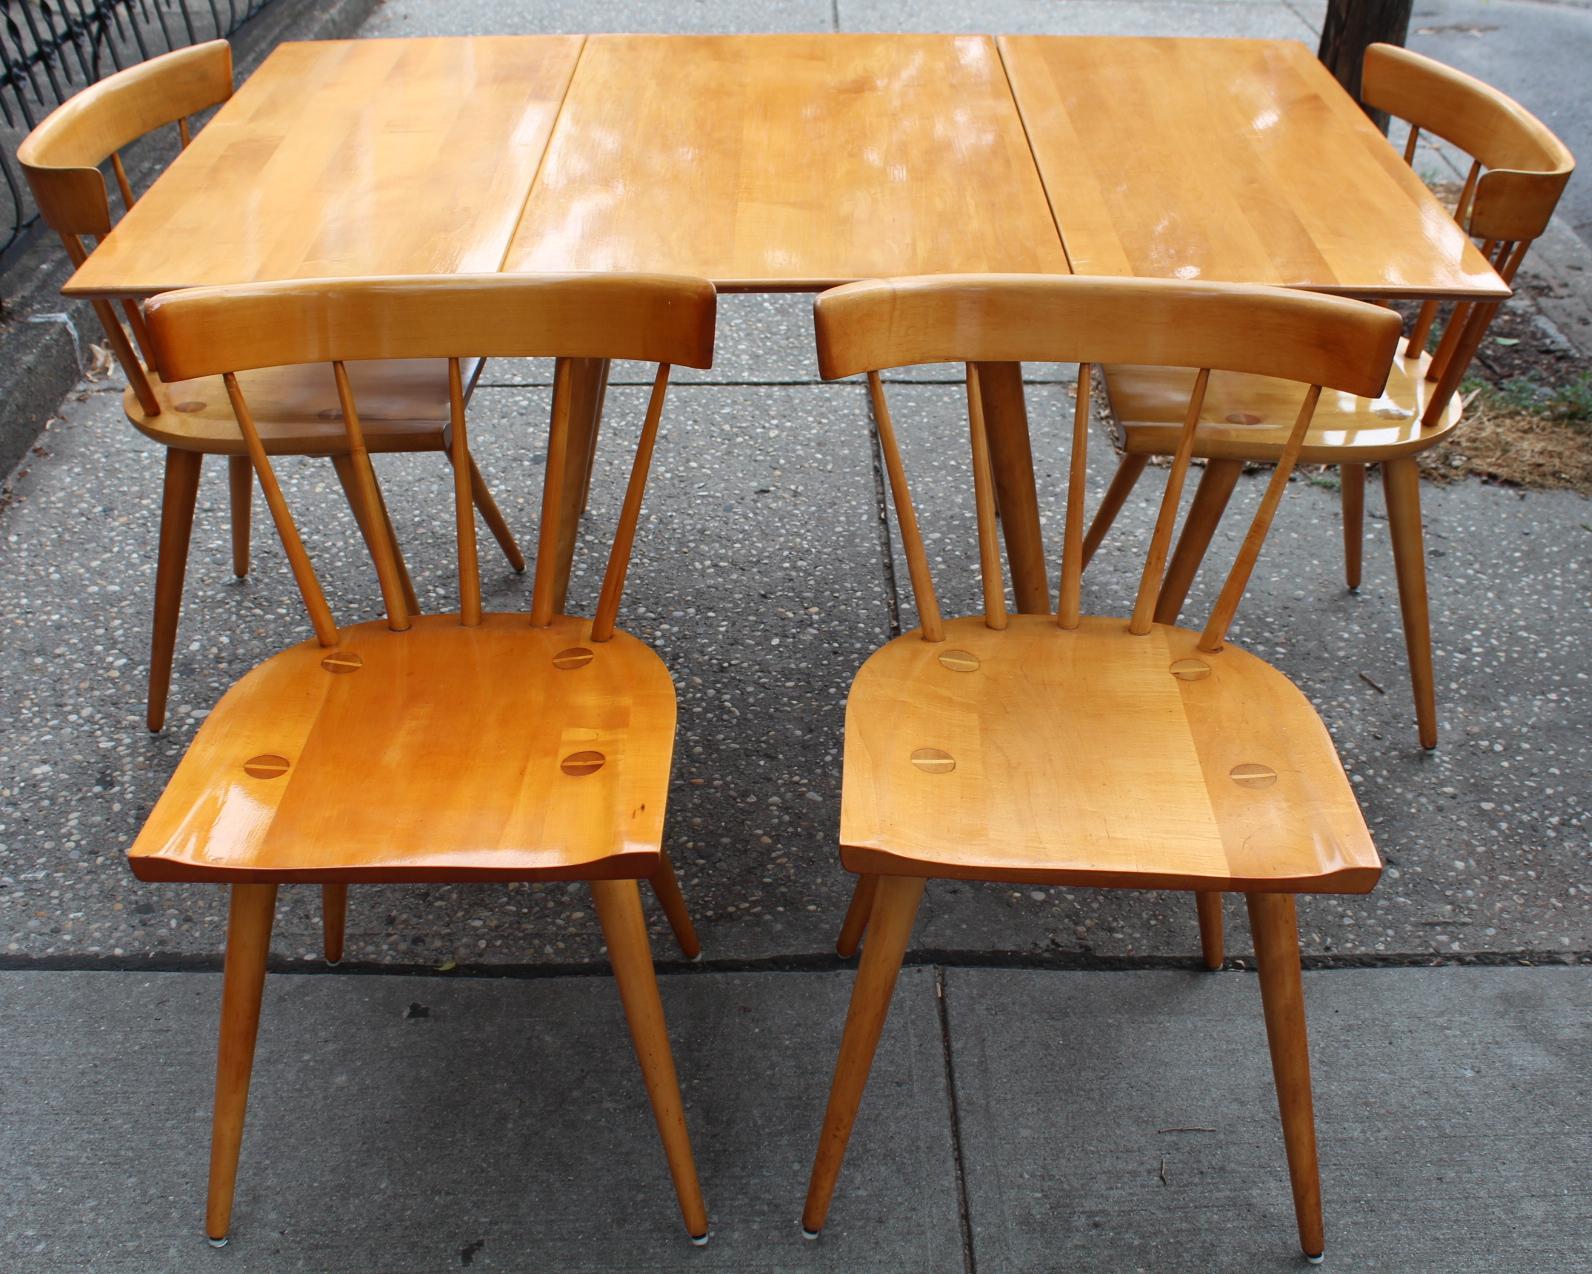 Paul McCobb Mid-Century Modern dining room set in maple wood, consisting of four chairs and a folding table. The set was manufactured in the United States in the 1950s and is in very good vintage condition.